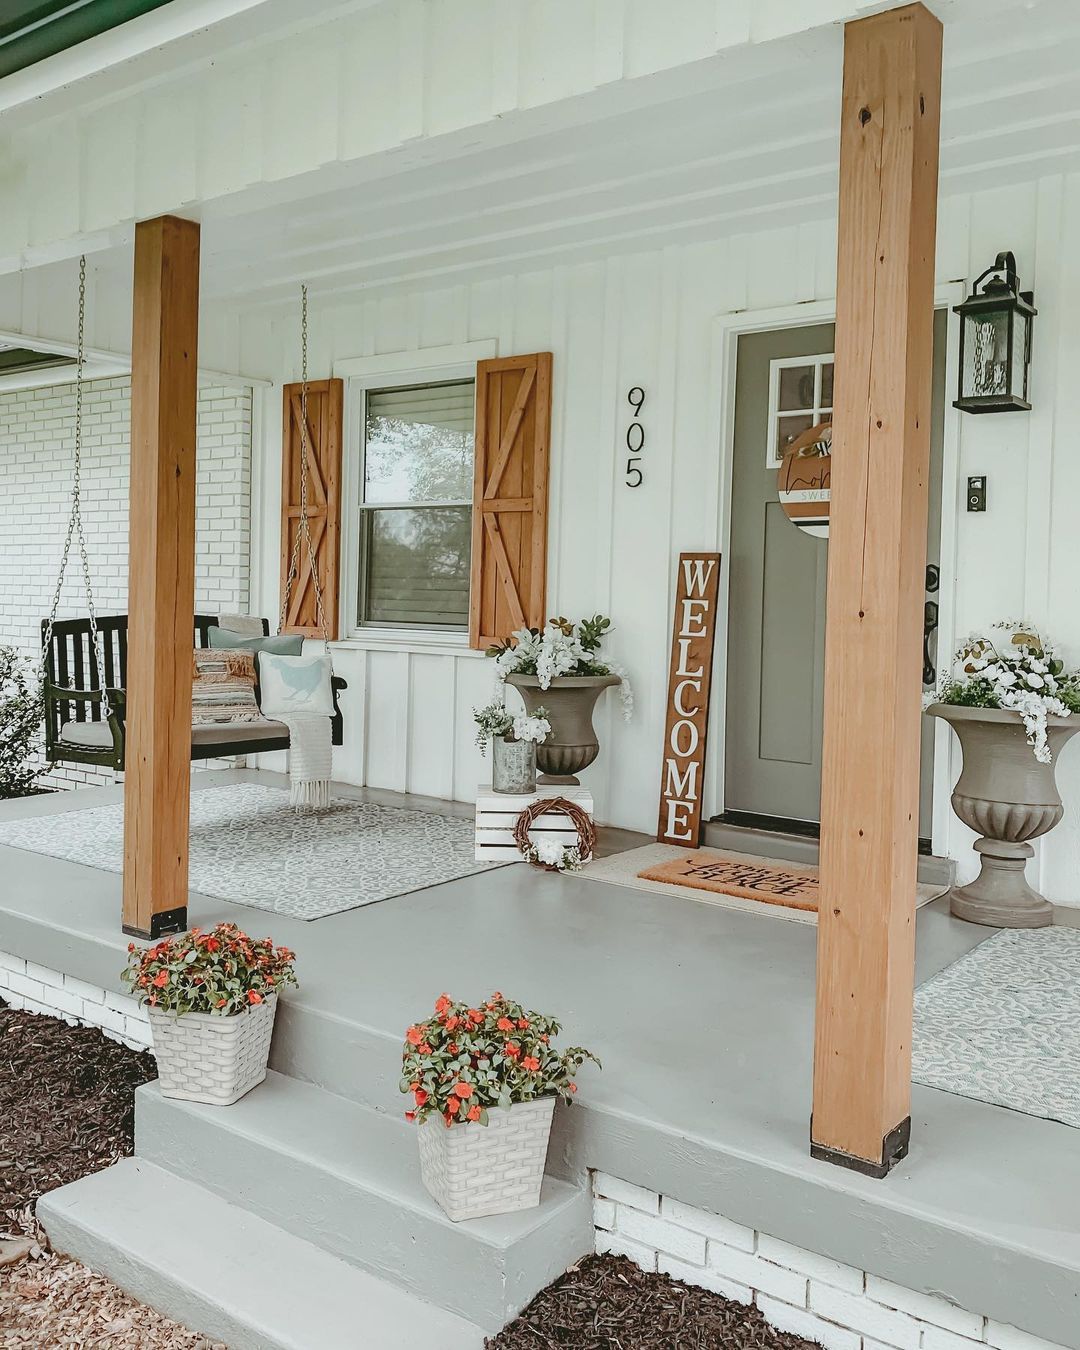 Charming Ways to Spruce Up Your Front Porch